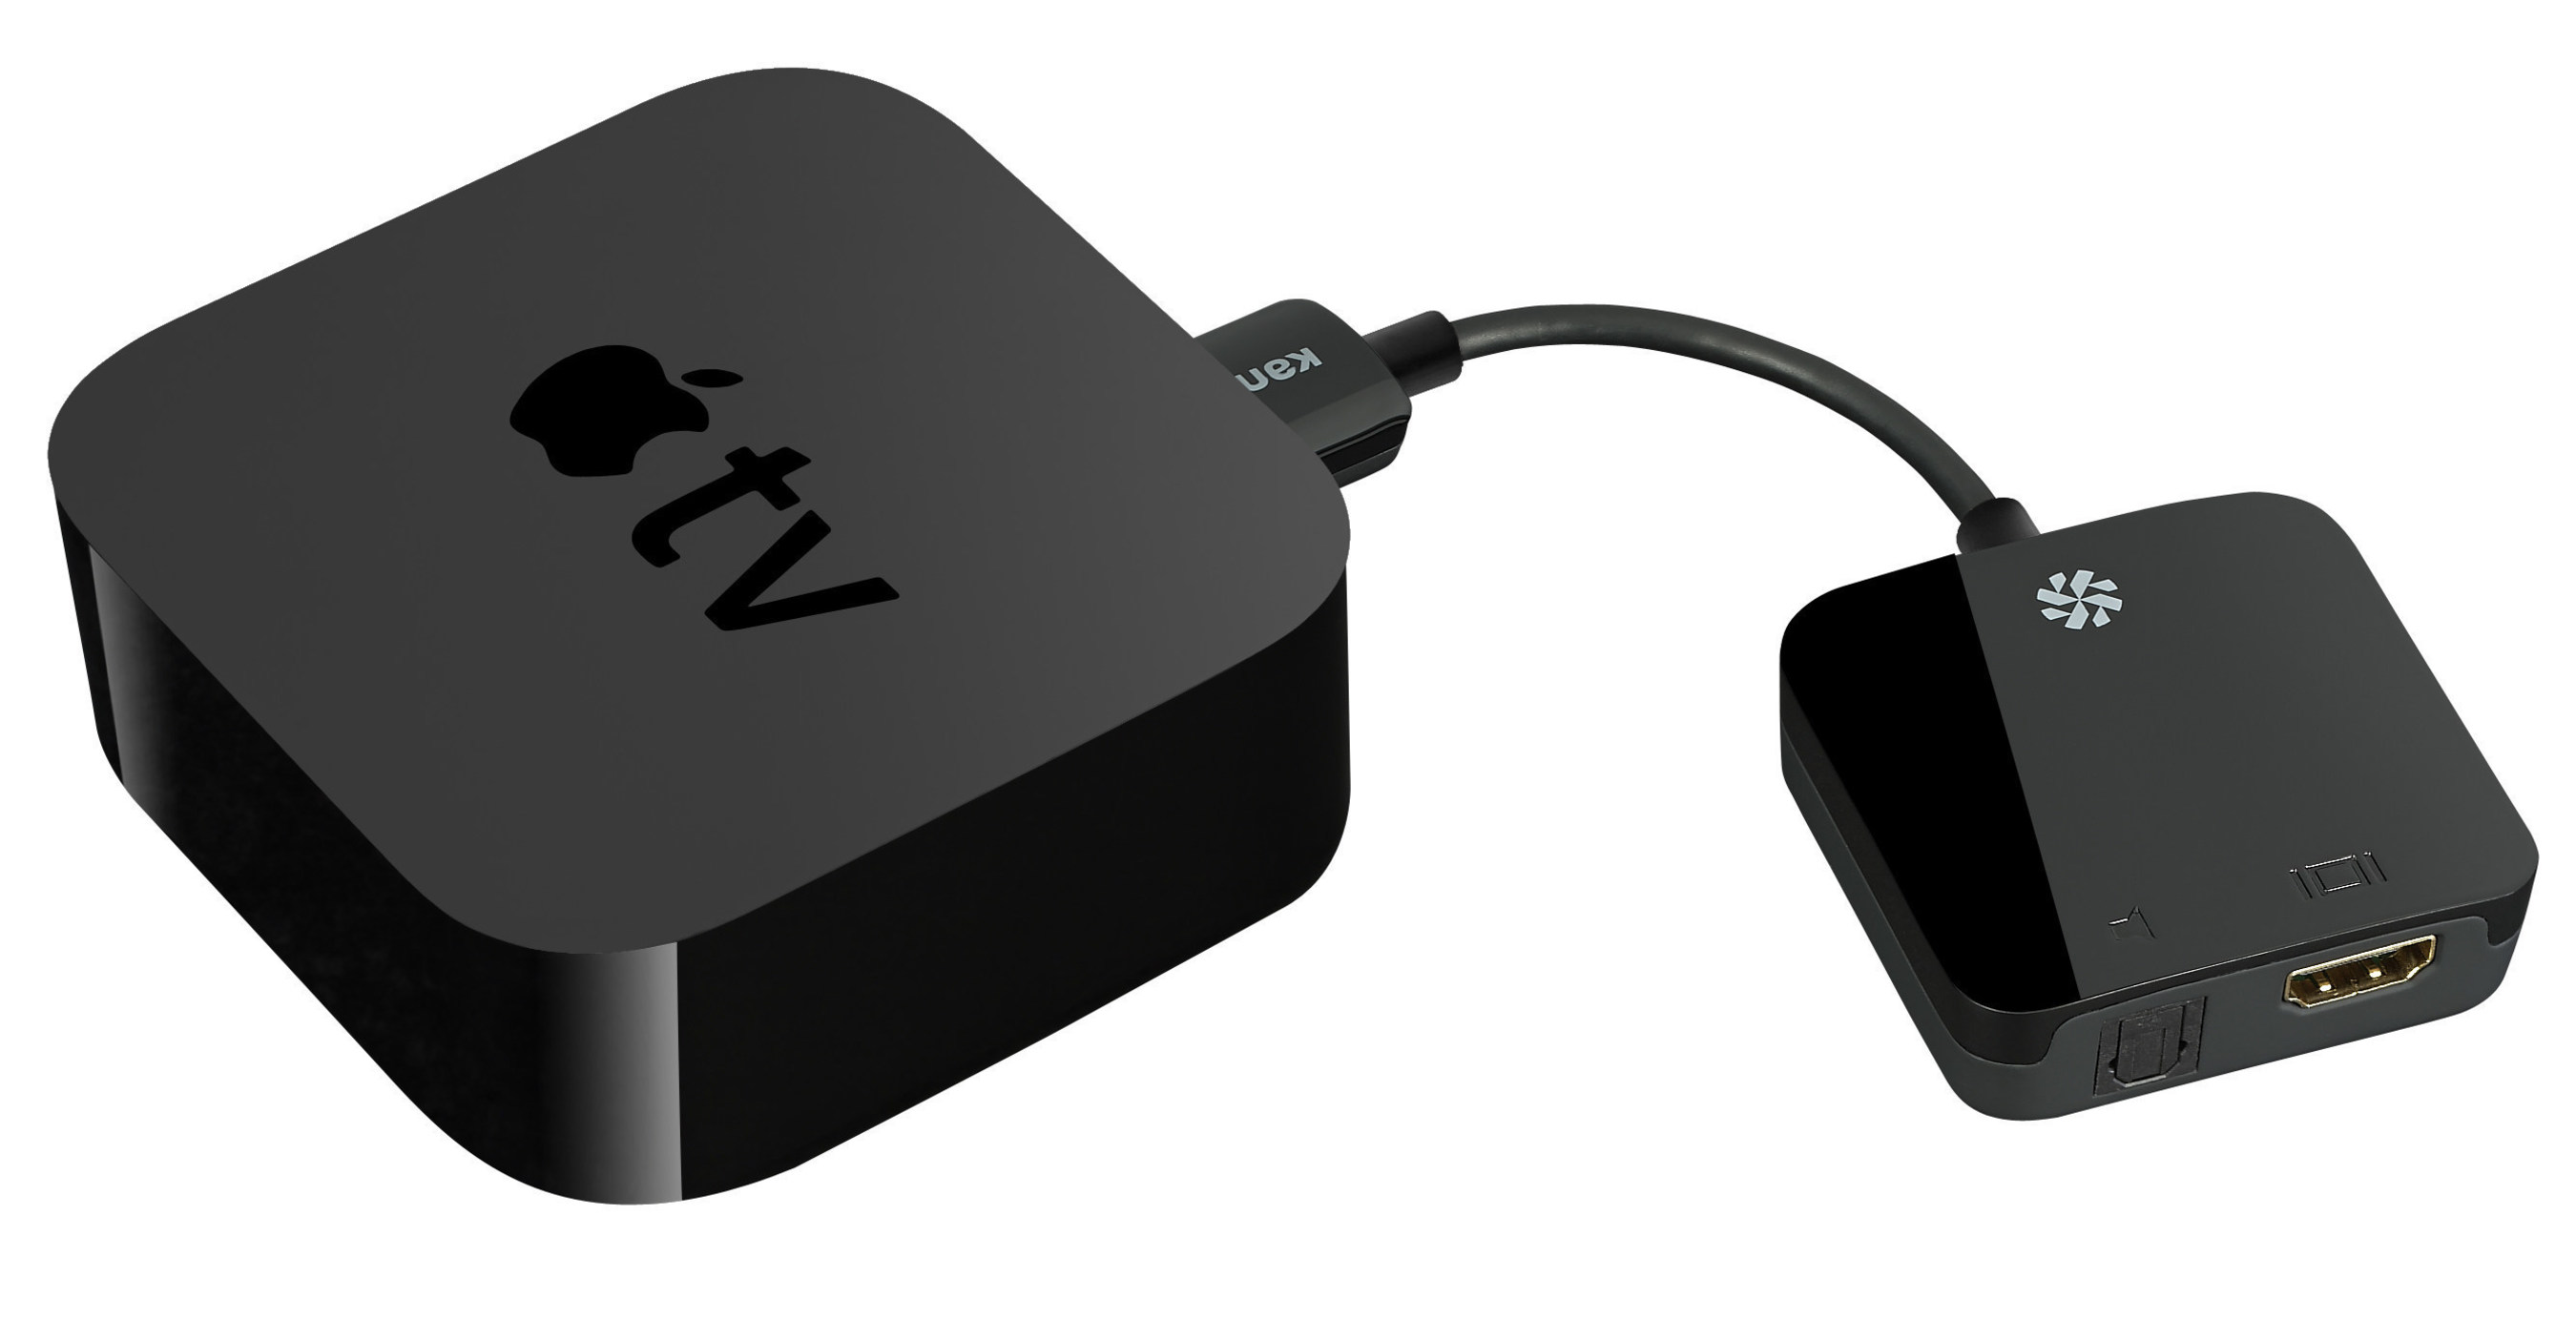 Kanex Introduces Adapters for Apple TV 4th